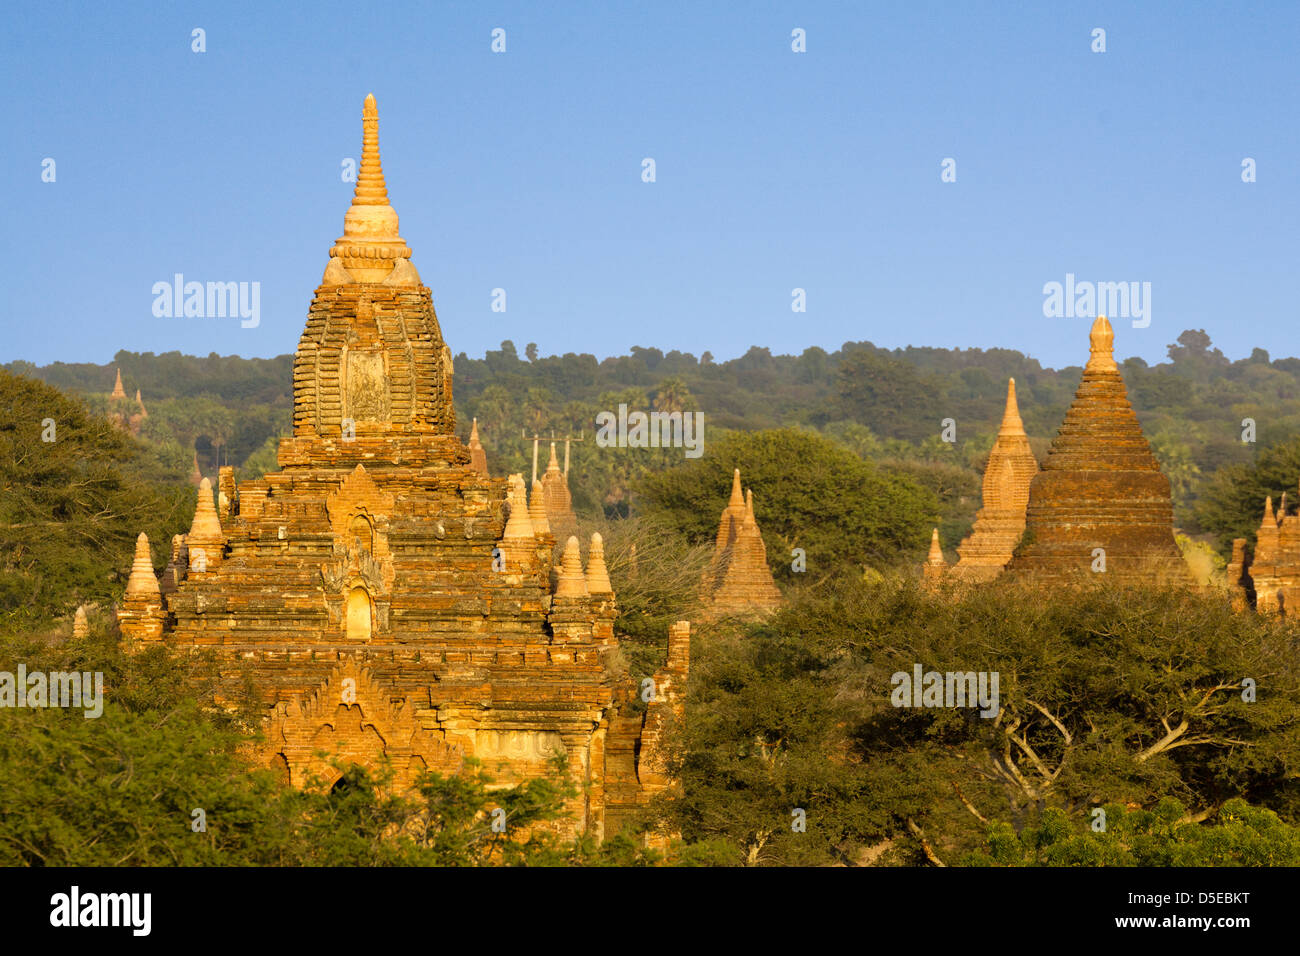 The Temples and Pagodas of Bagan, Myanmar - early morning 11 Stock Photo